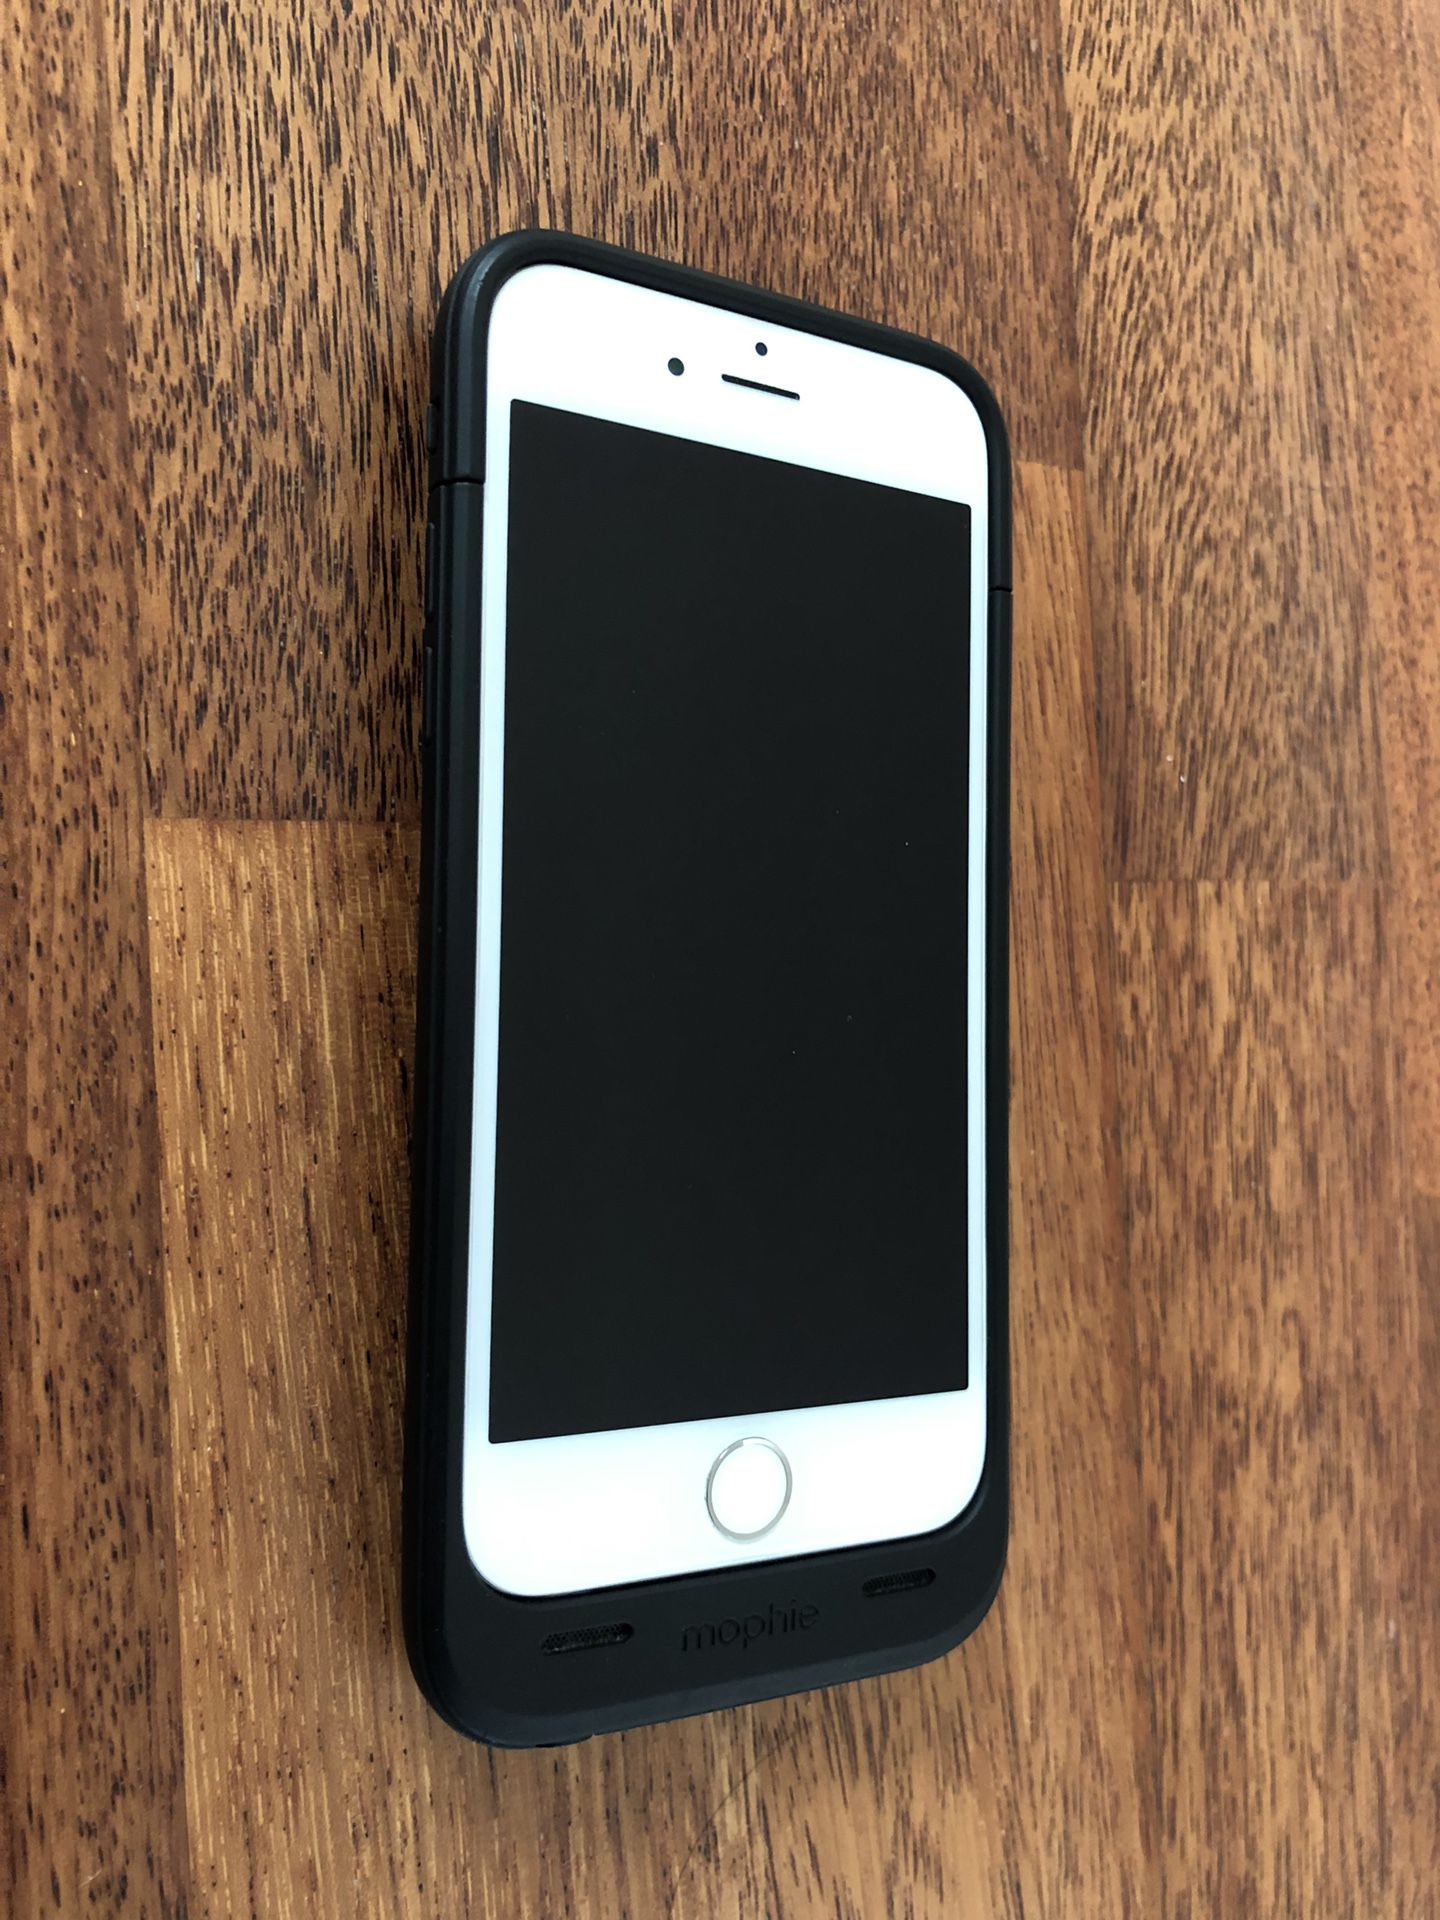 iPhone 6 16GB Gold w/ Mophie Case